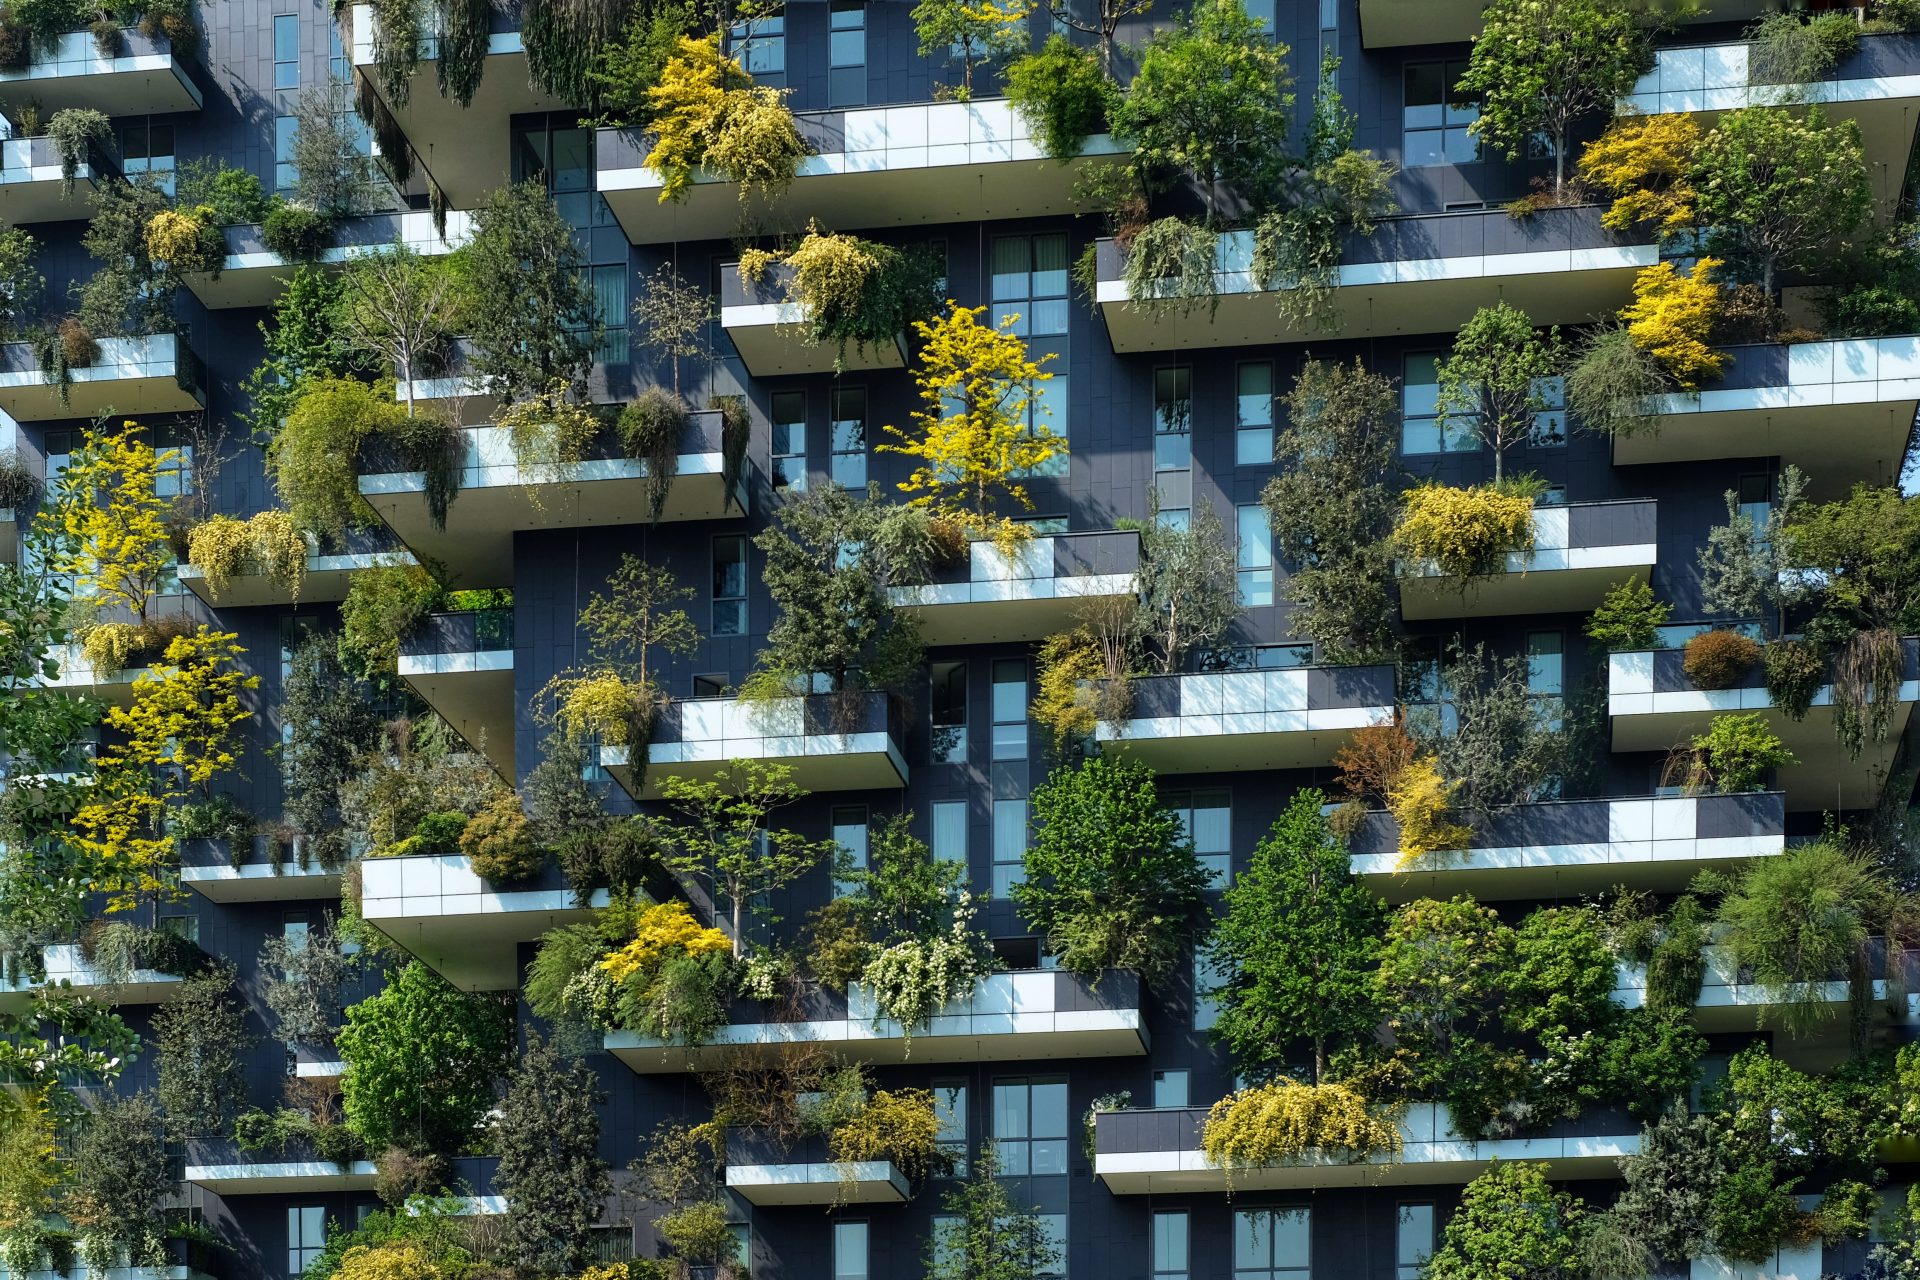 <p>In the wonderful 'Bosco Verticale' in Milan, vegetation is replenished by rainwater harvesting systems, replicating natural conditions and creating a subtle variation in temperature, humidity, and air drifts.</p>